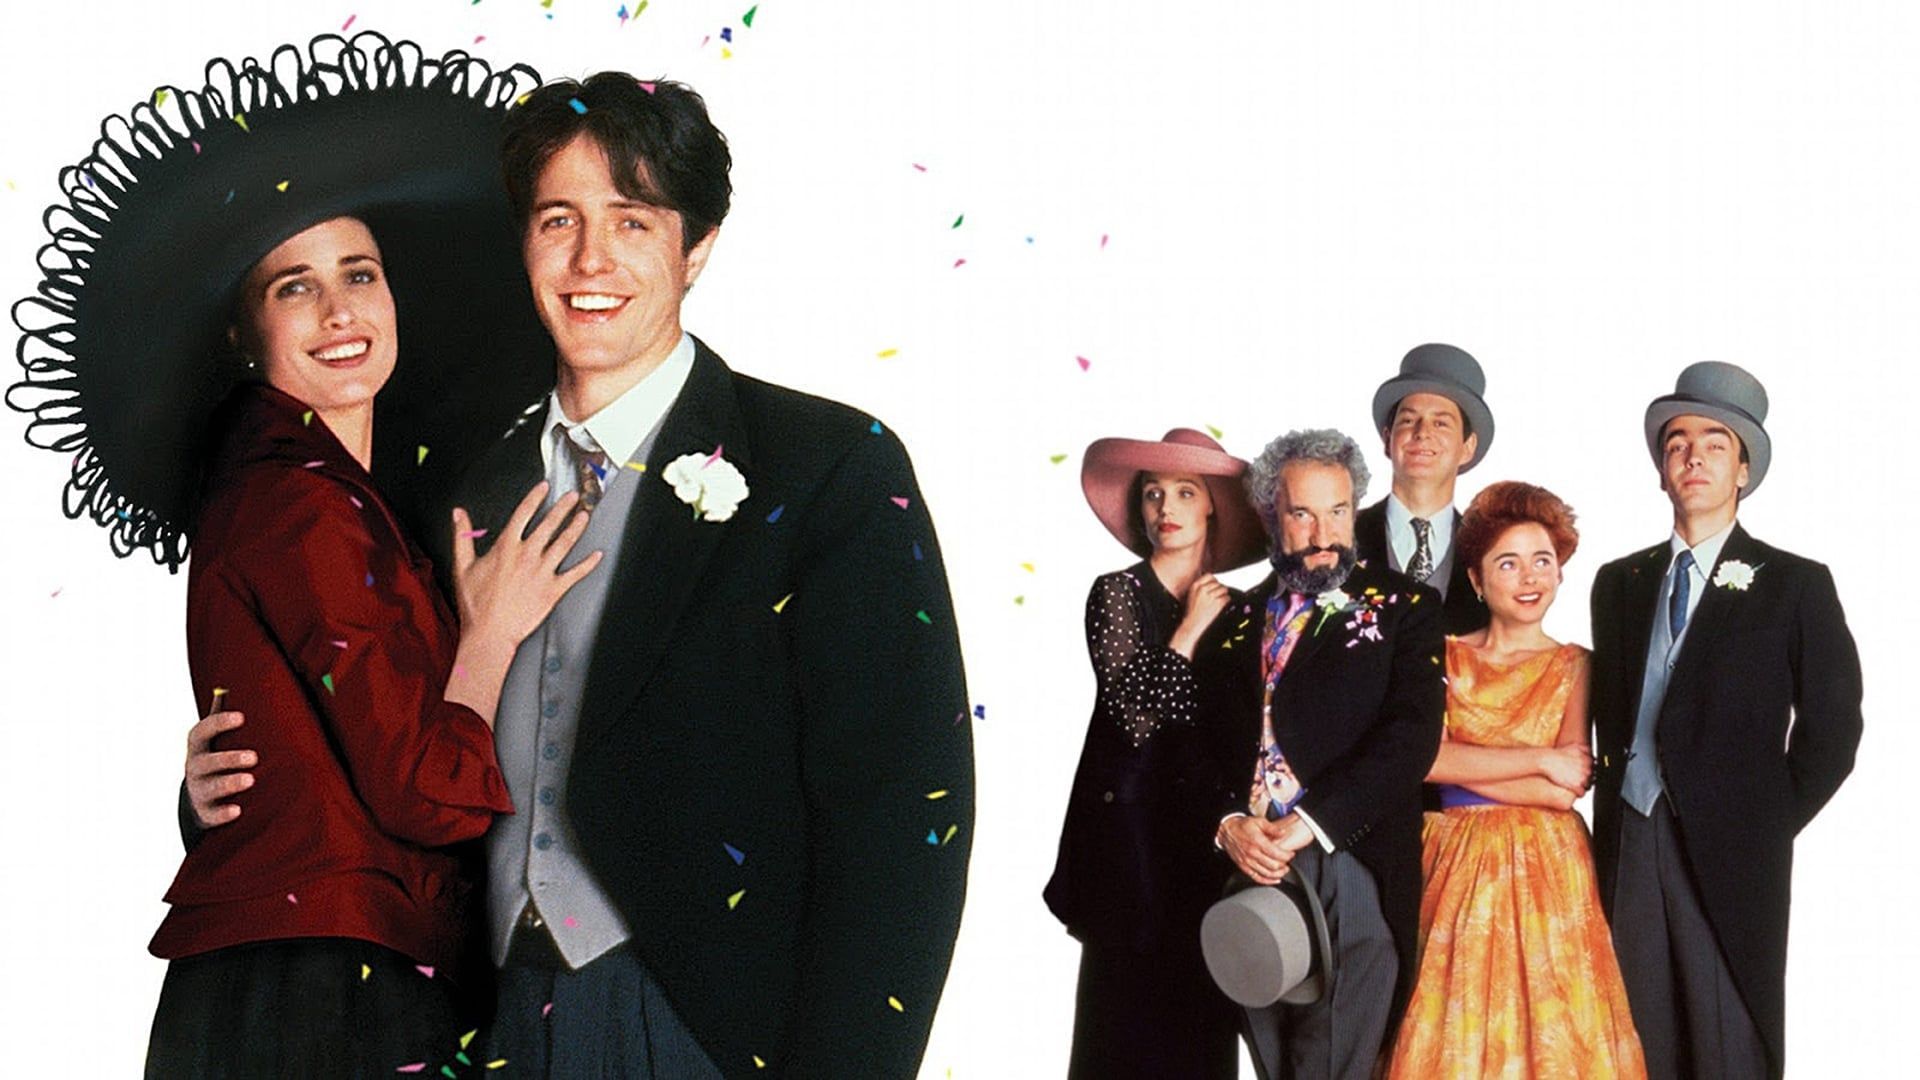 Four Weddings and a Funeral Backdrop